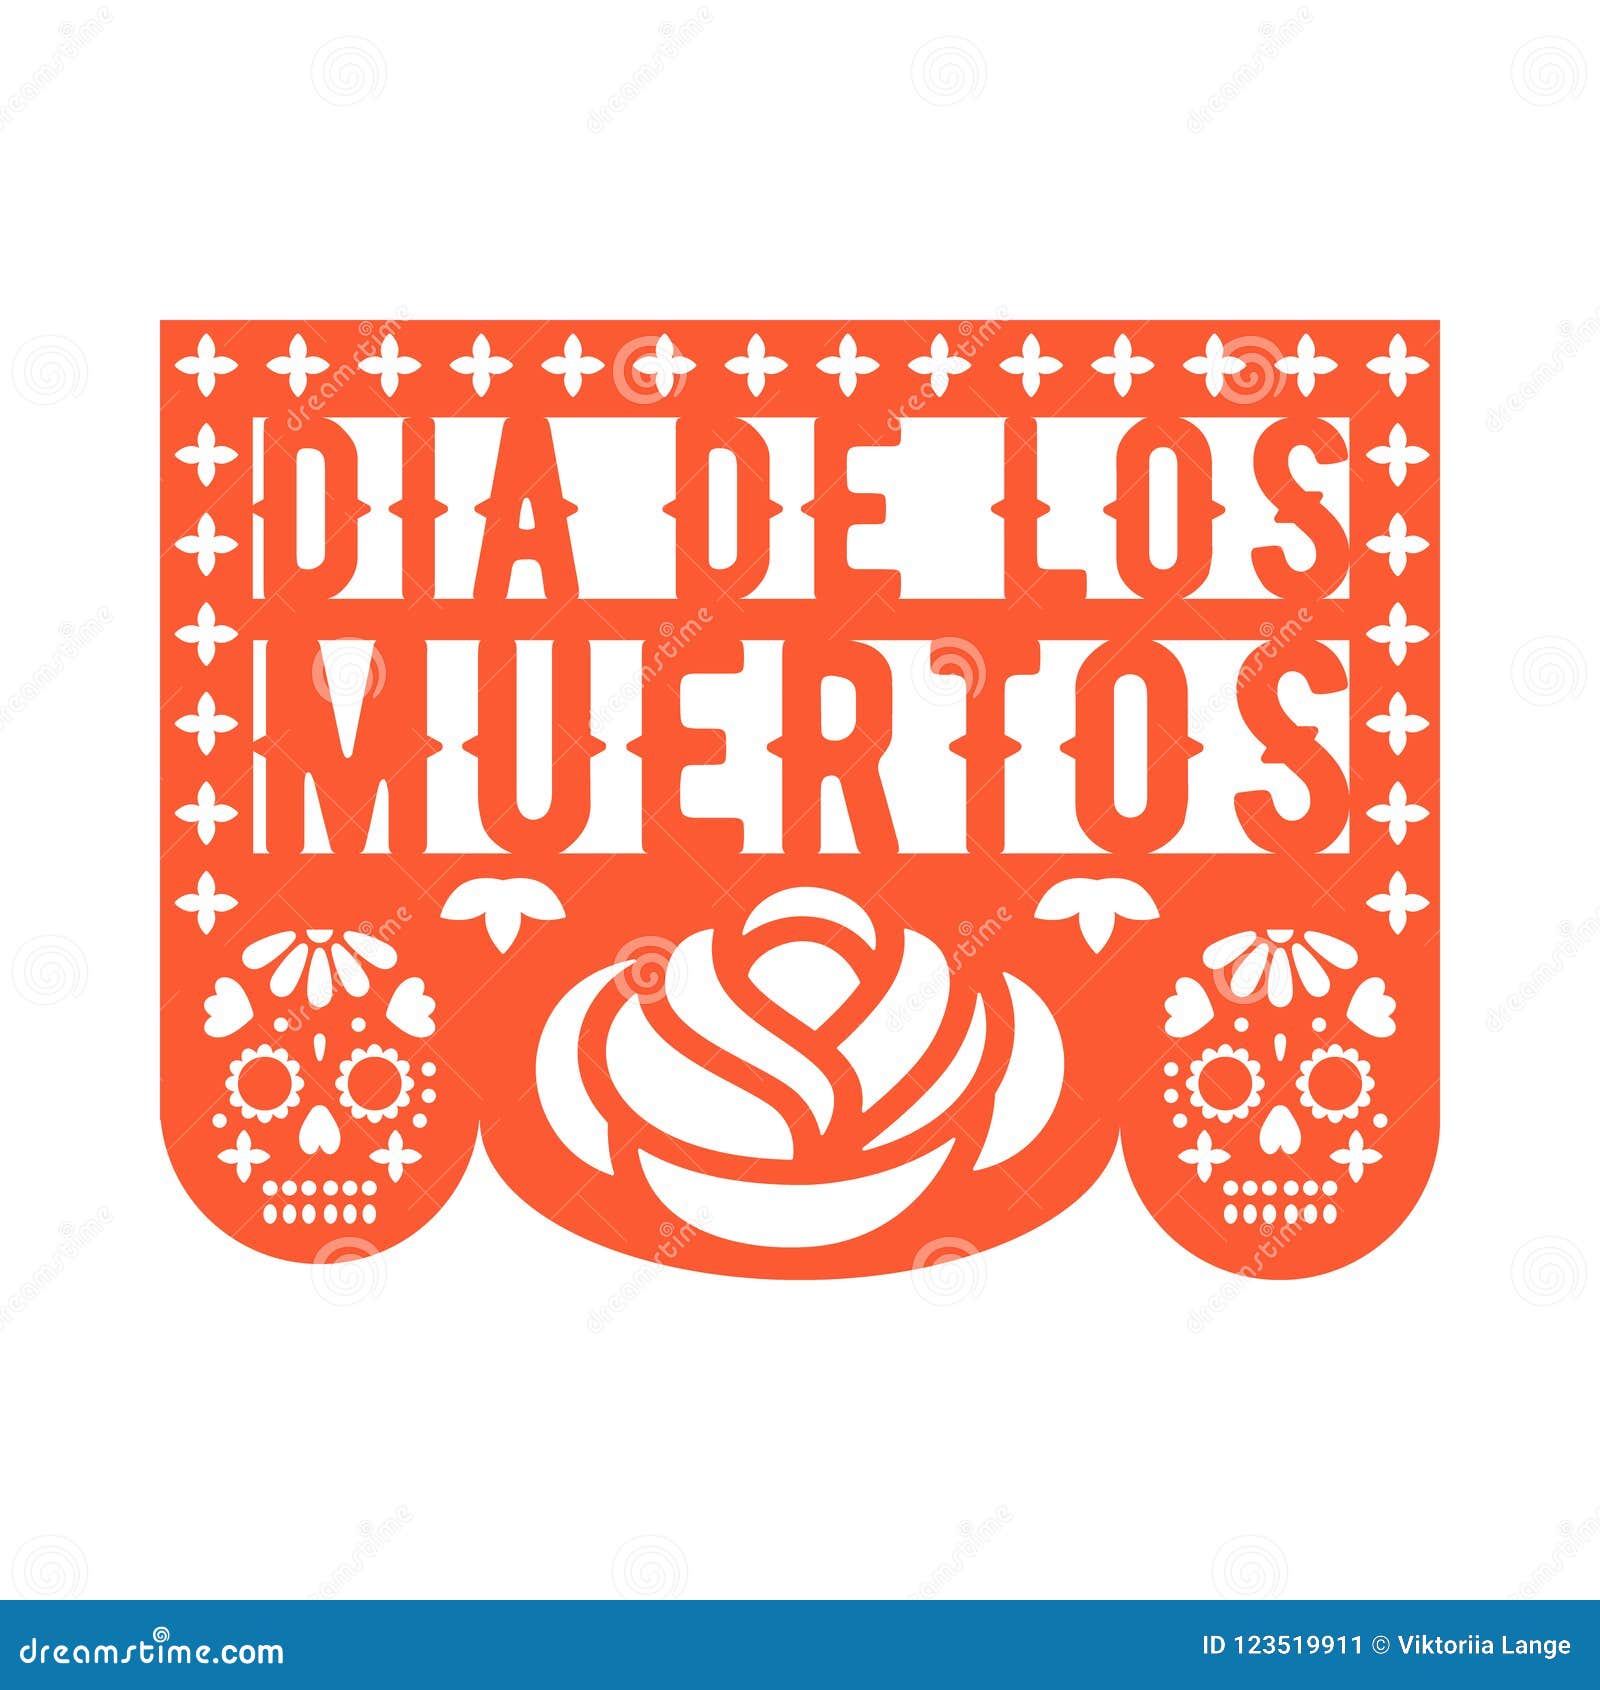 papel picado, mexican paper decorations for party.